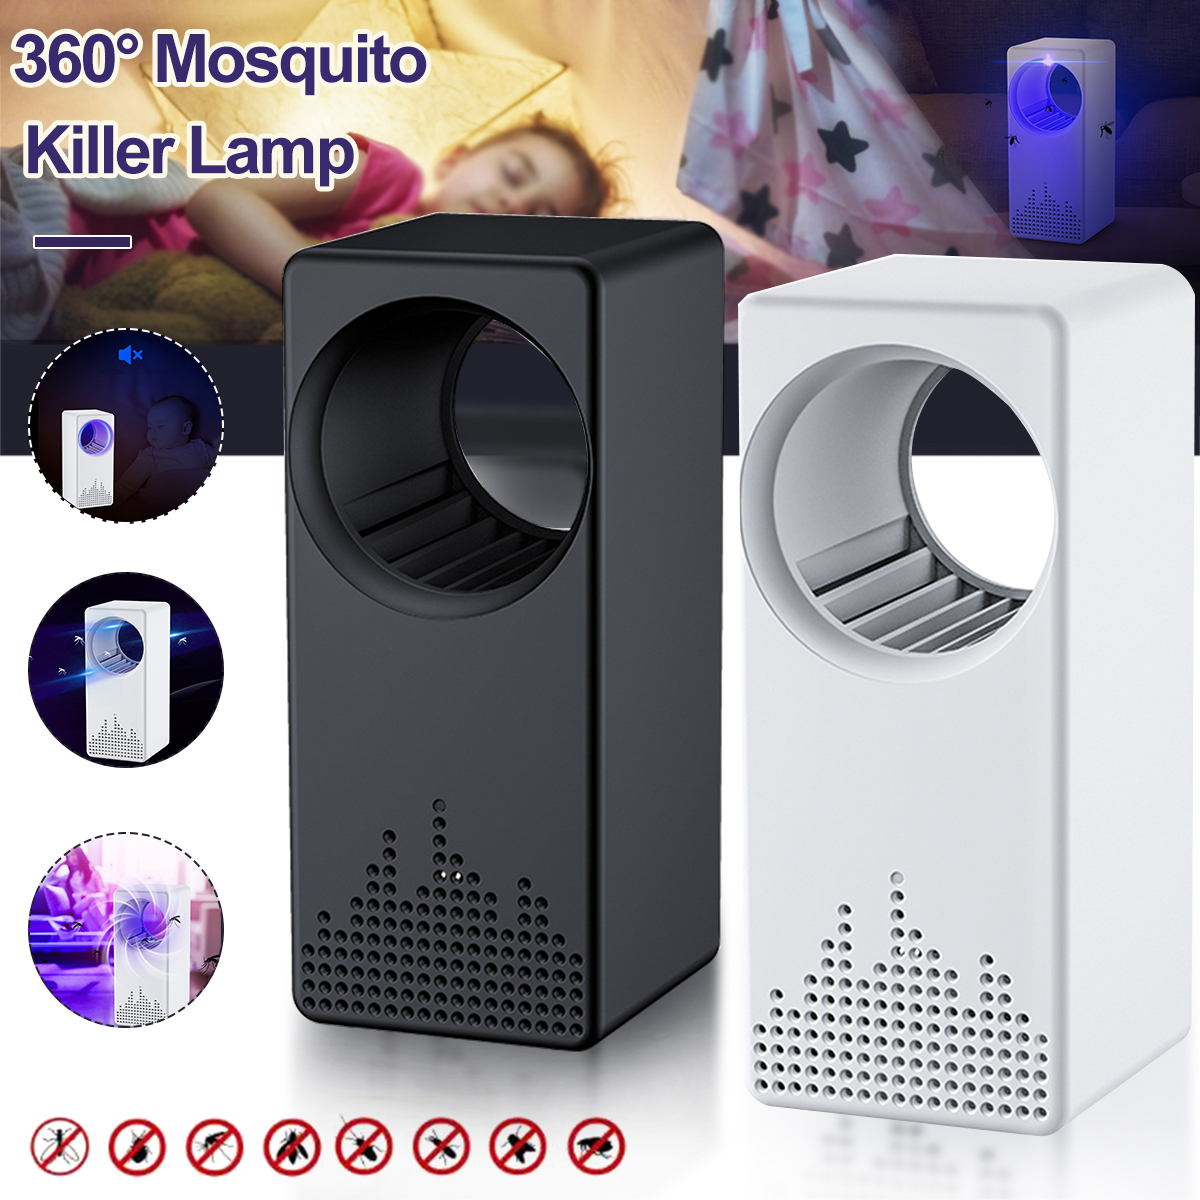 Multi-function-USB-Rechargeable-Mosquito-Killer-LED-Slient-Insect-Repellent-Dispeller-For-Home-Offic-1653934-1